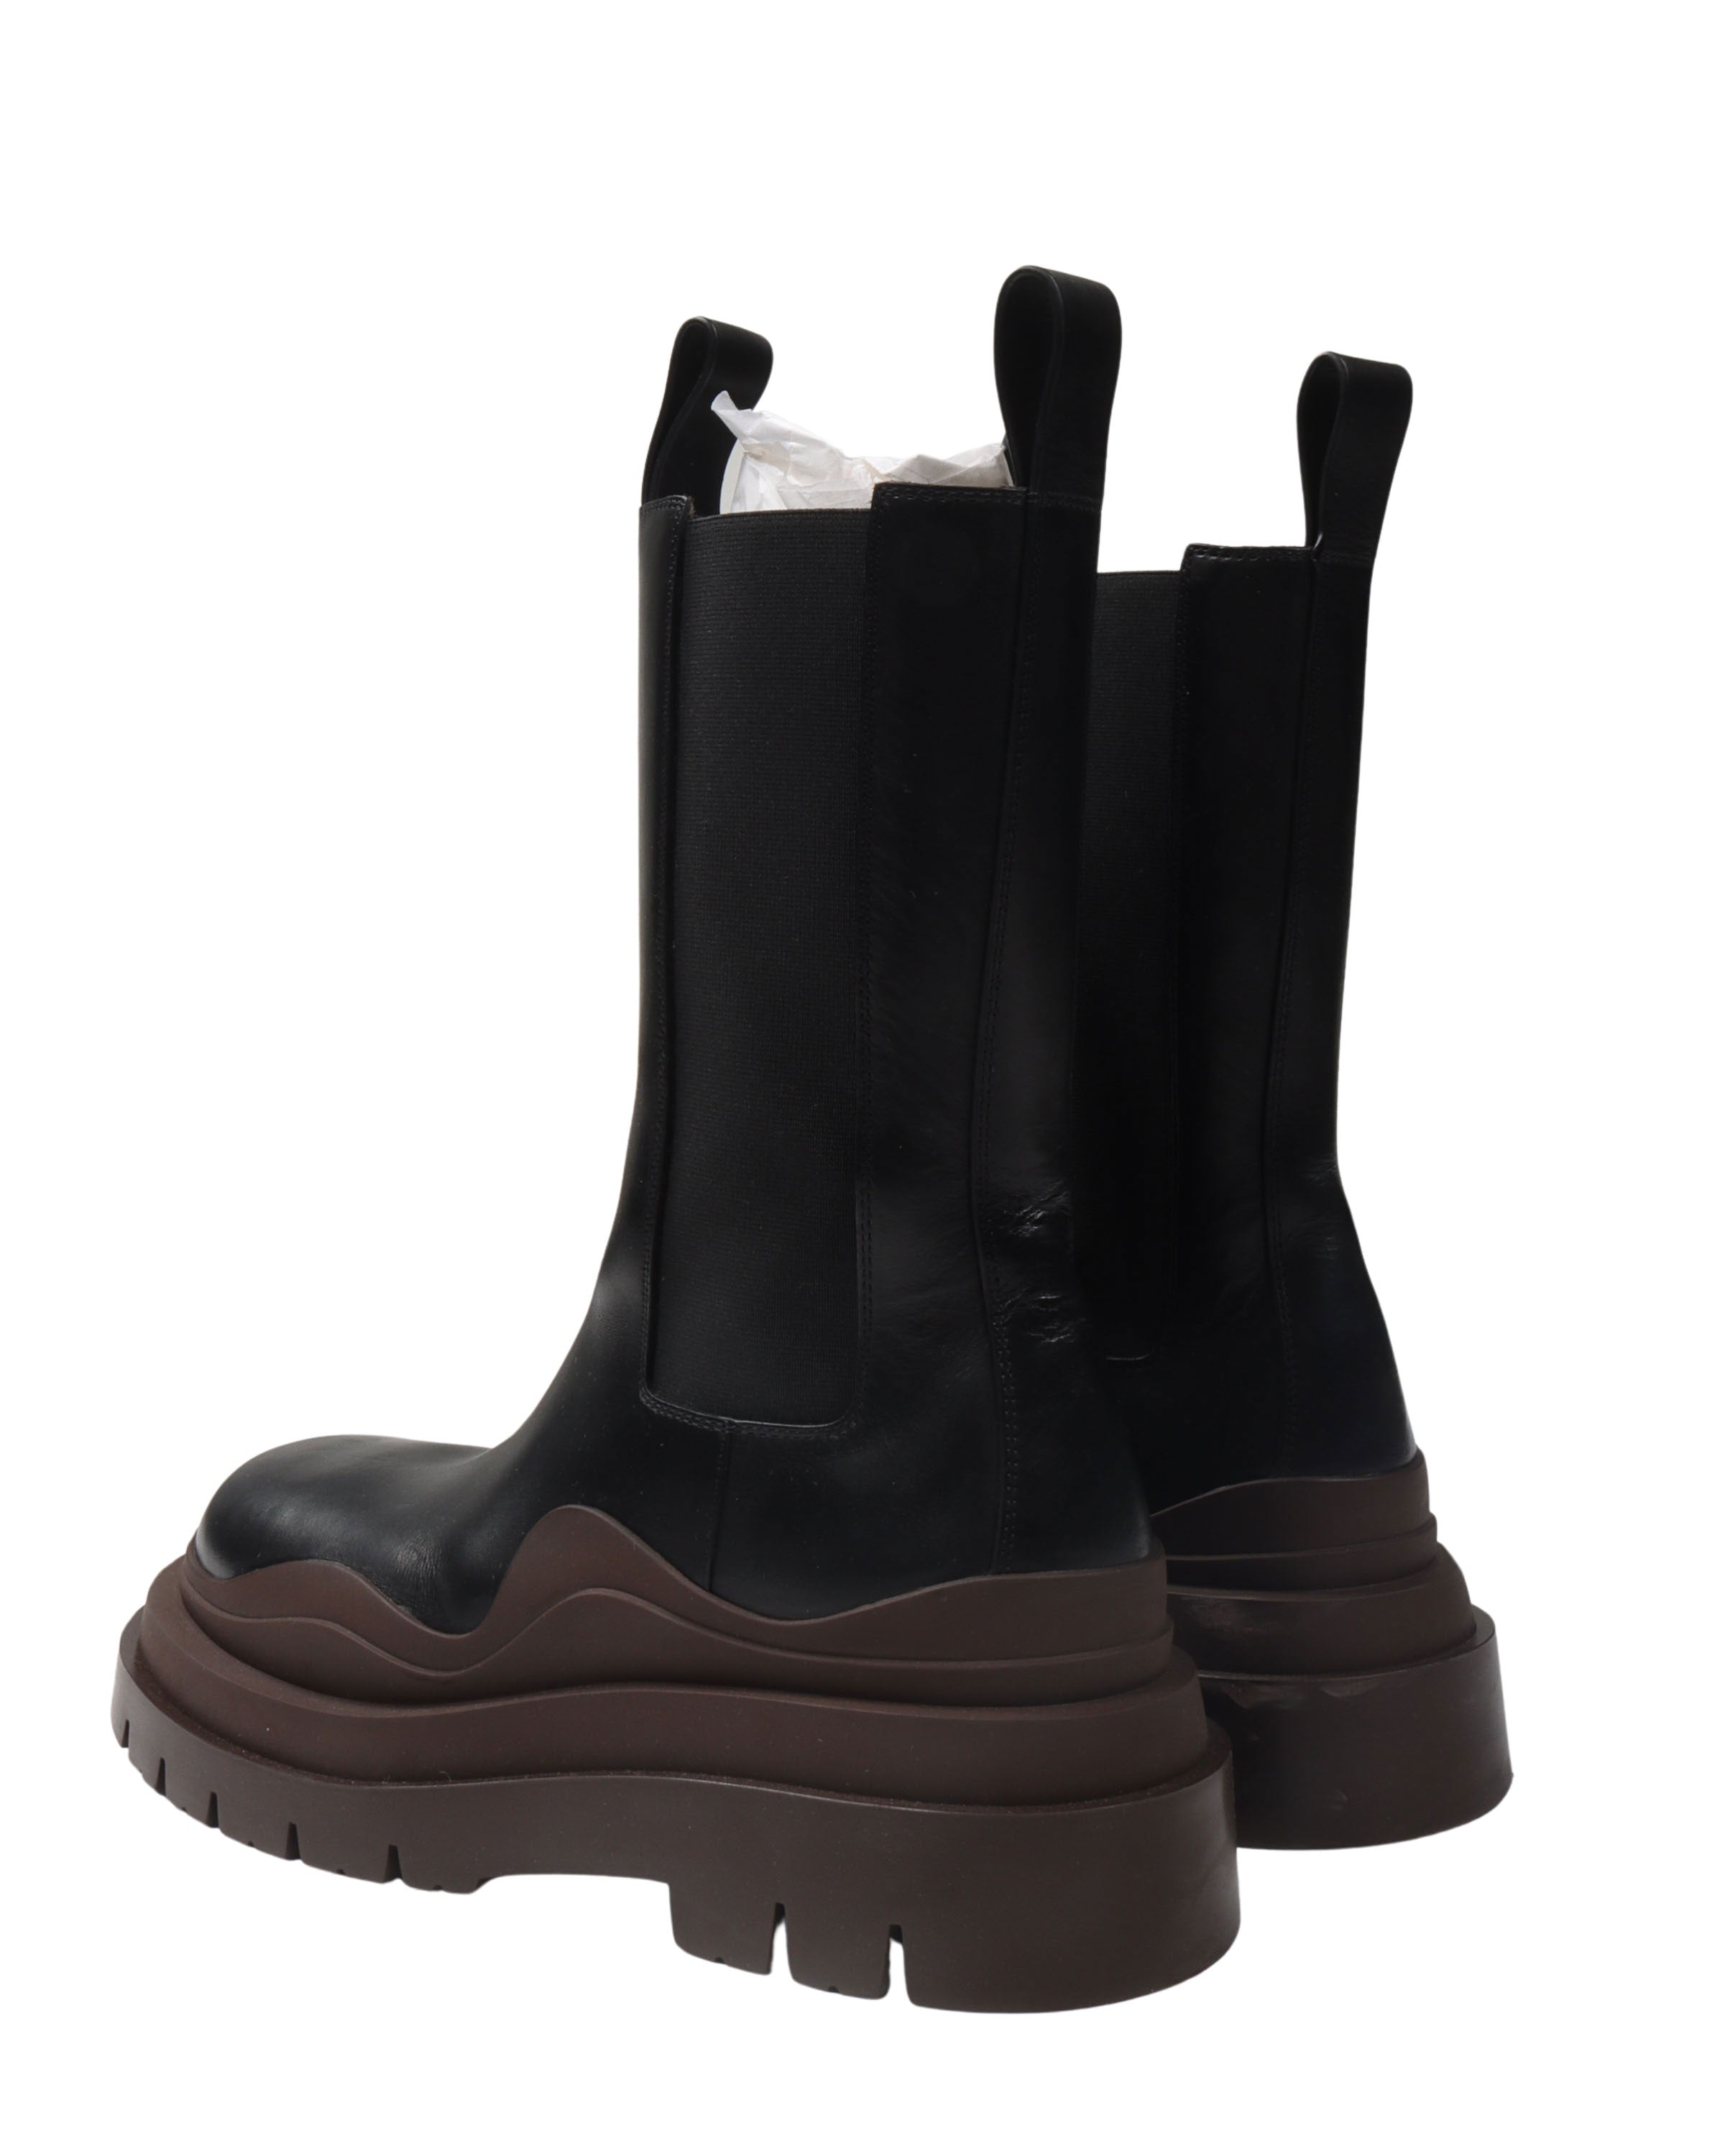 Leather Contrast Sole Tire Boots